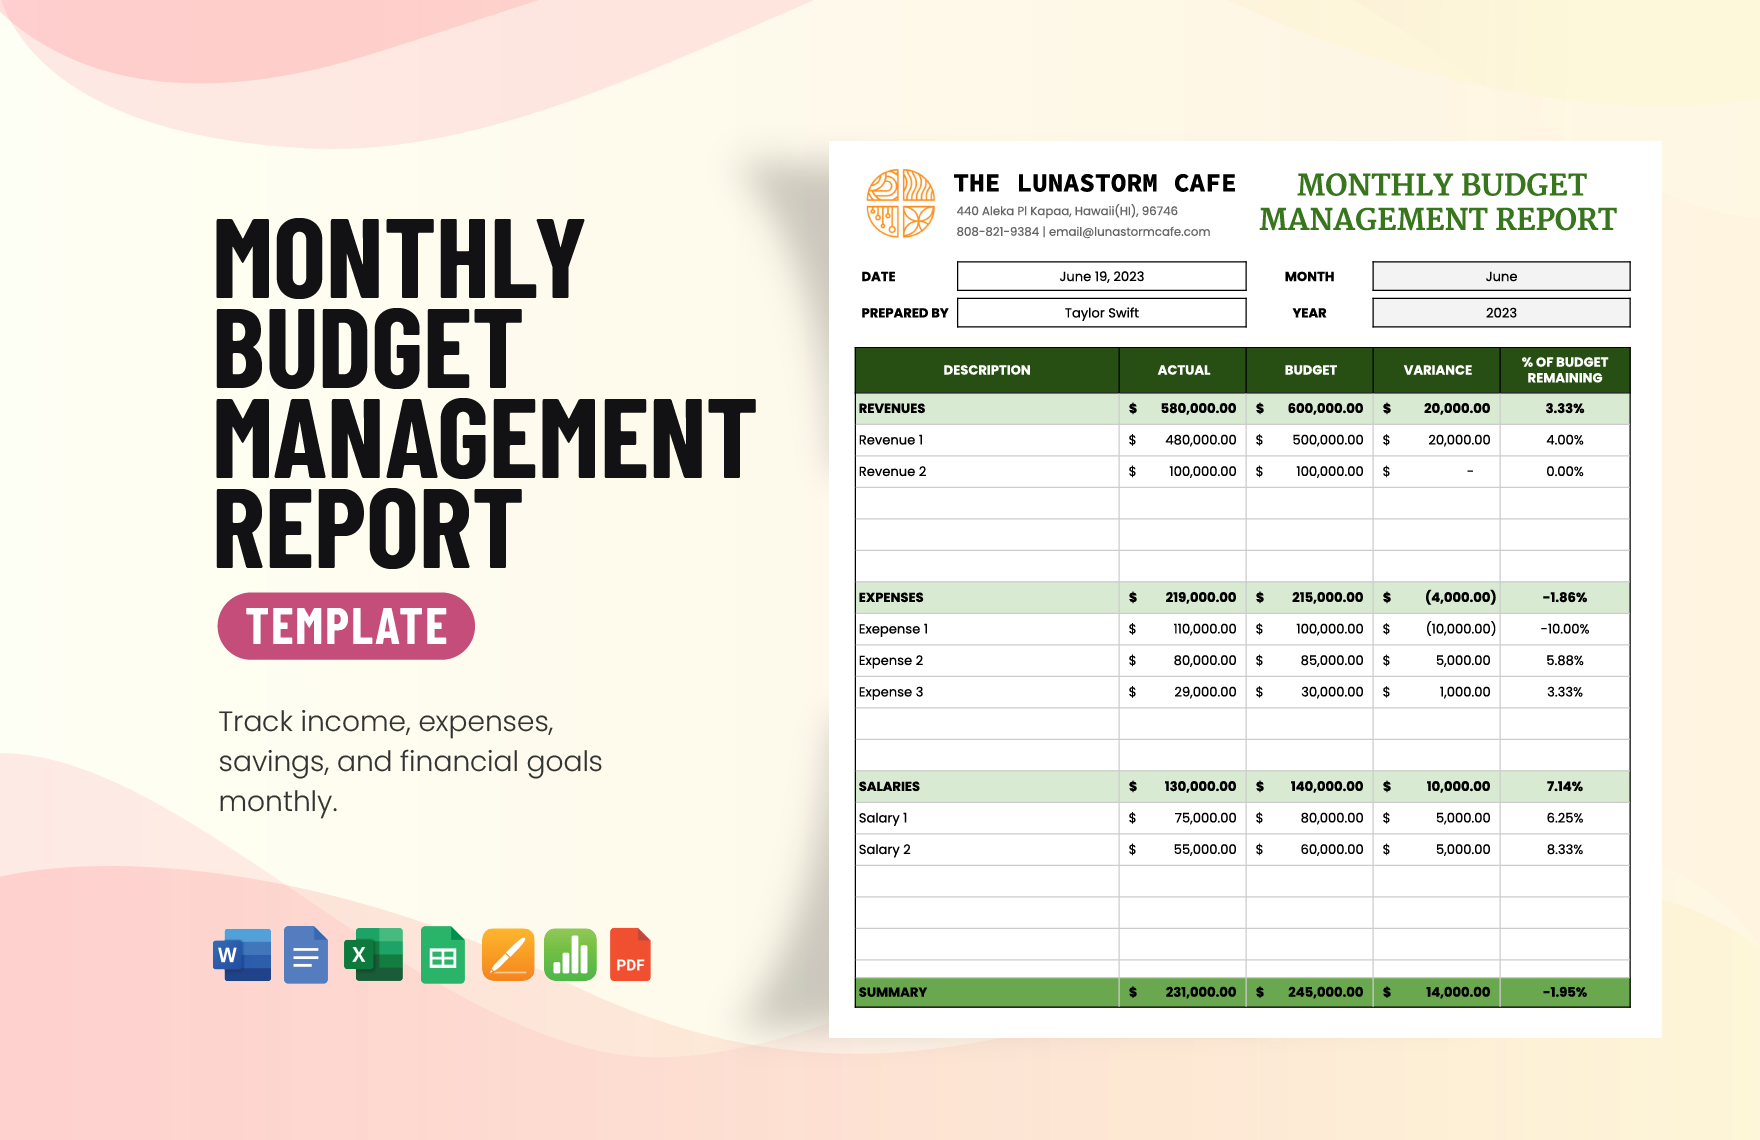 Monthly Budget Management Report Template in Word, Google Docs, Excel, PDF, Google Sheets, Apple Pages